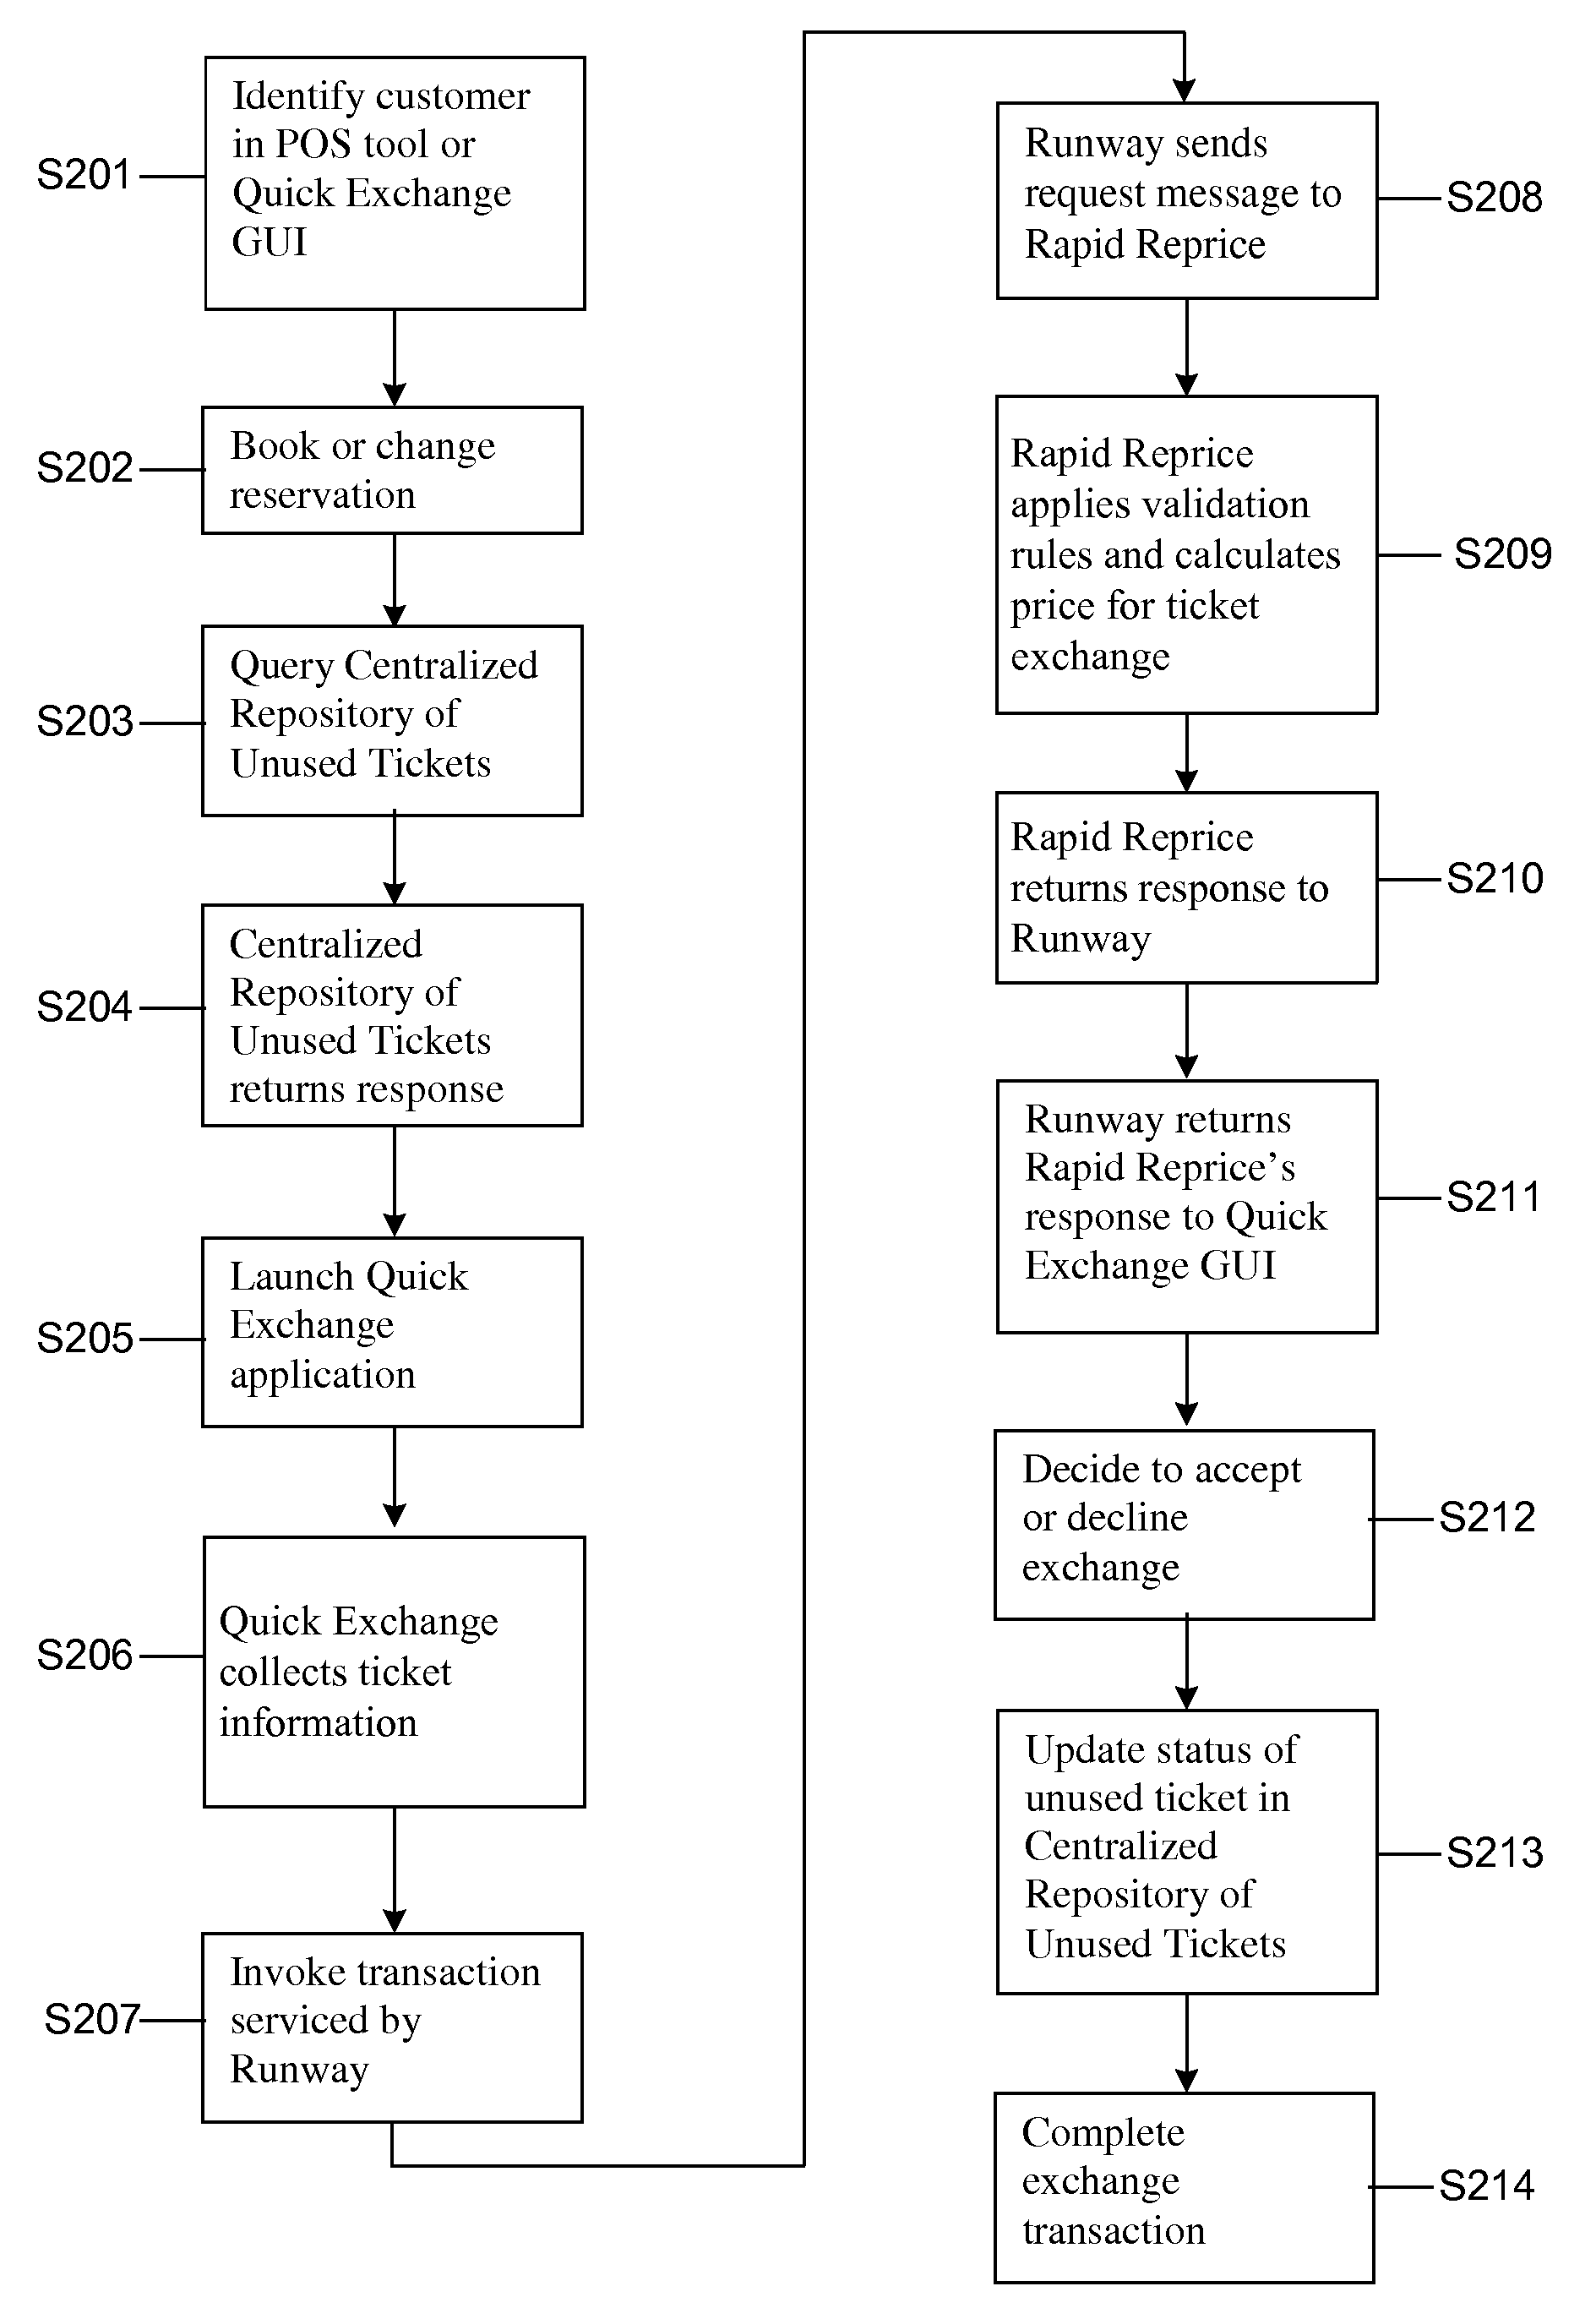 System and method for redemption and exchange of unused tickets